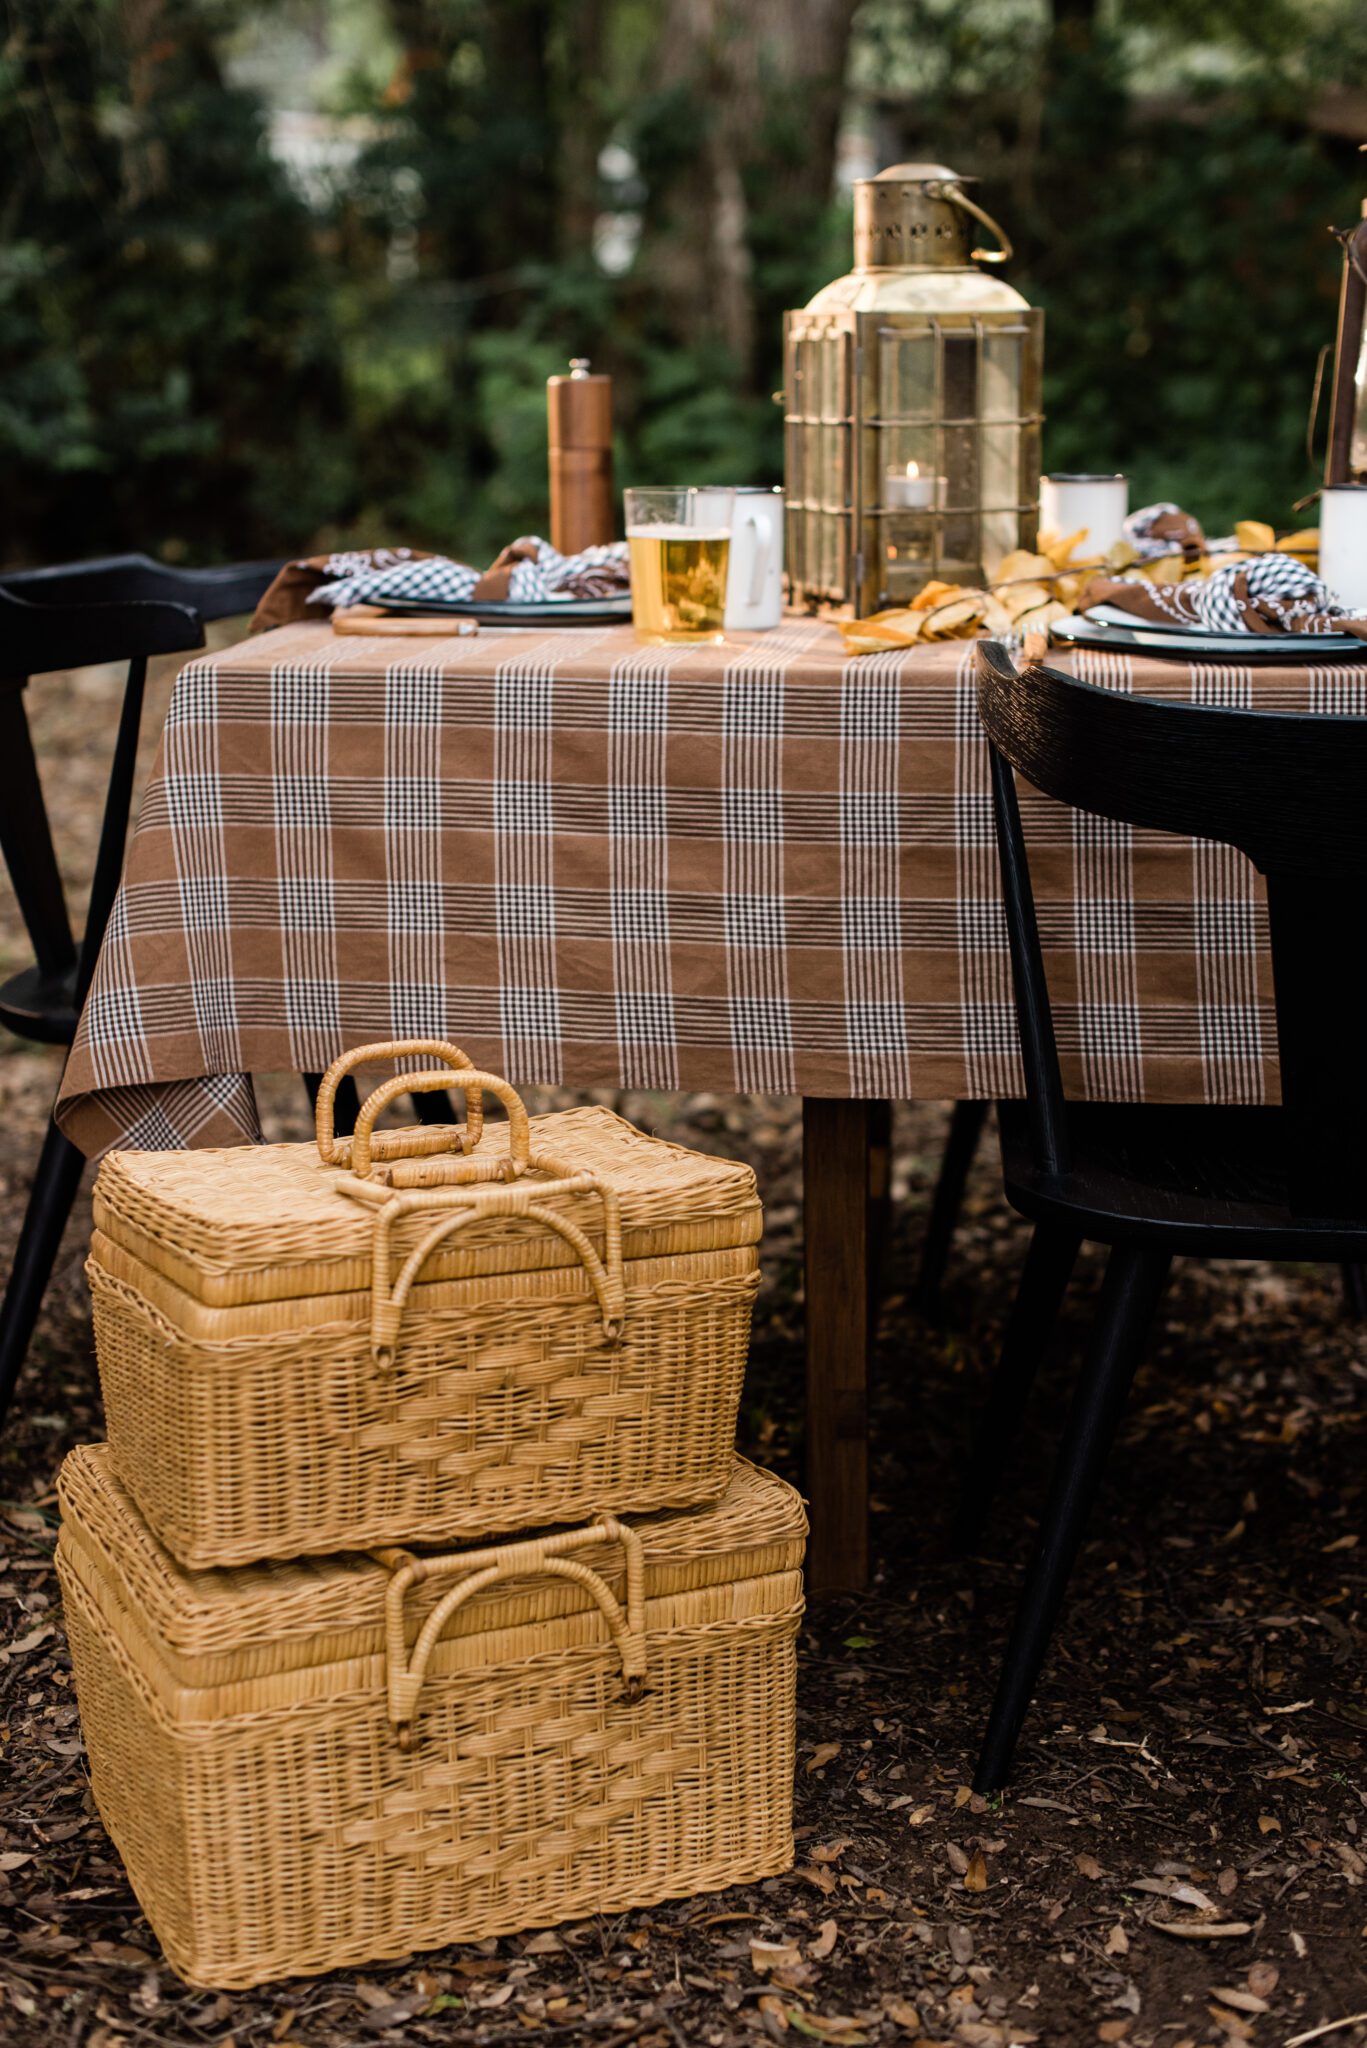 rustic outdoor table decor with fall colors